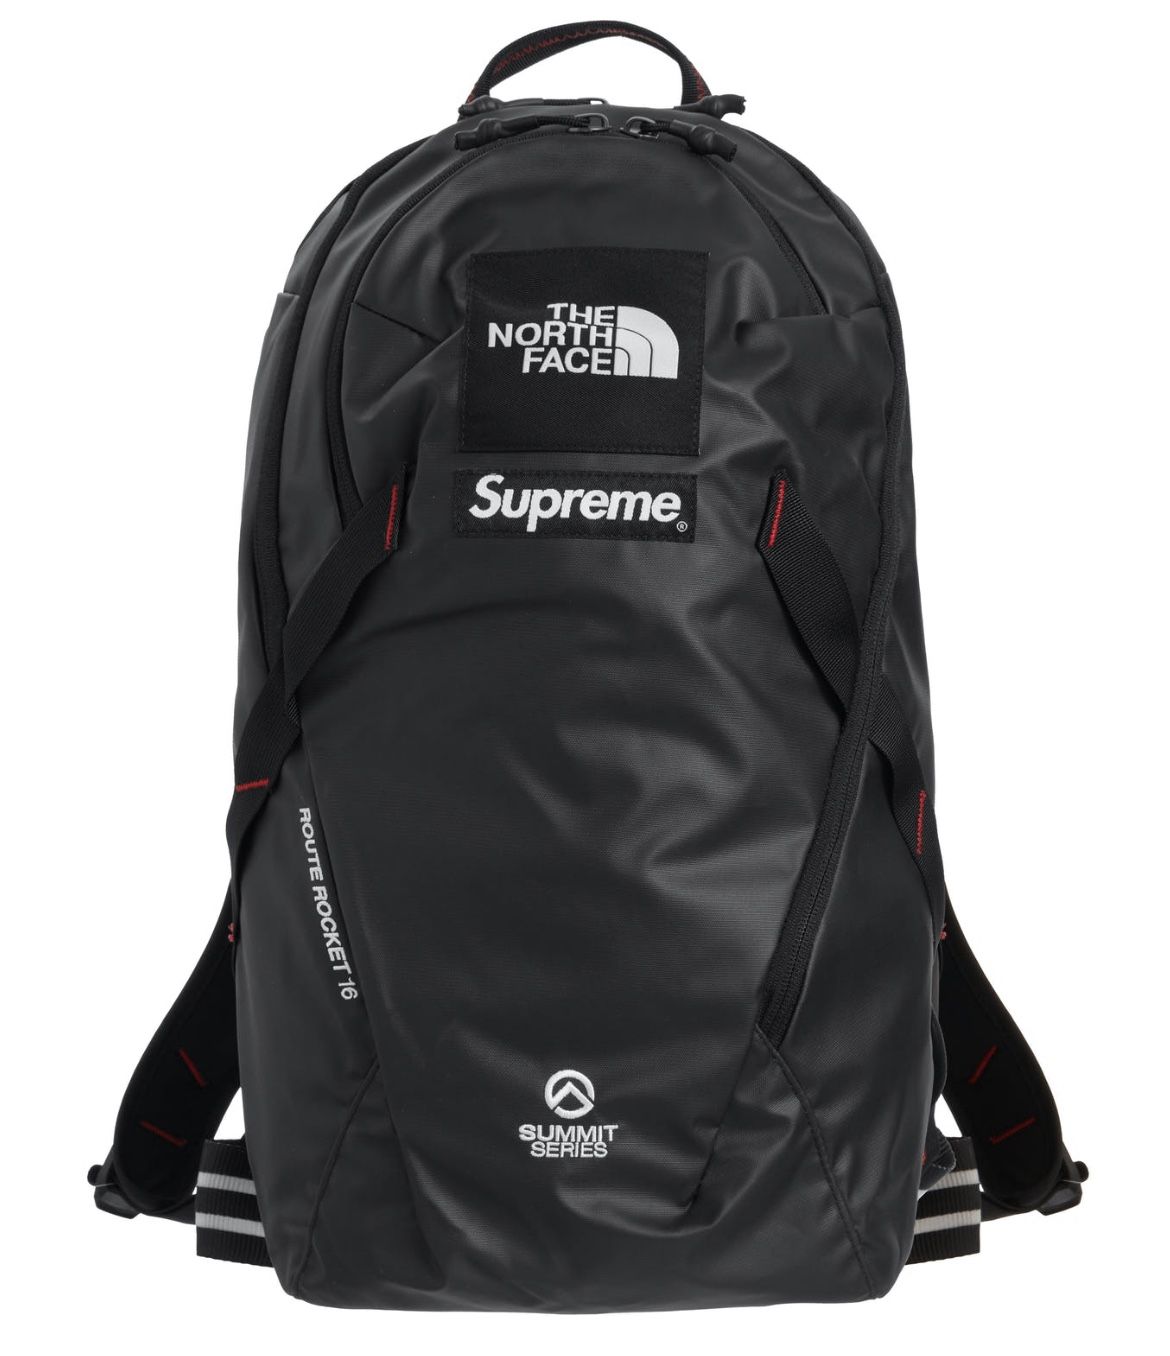 New* Supreme x The North Face Summit Series Black Backpack